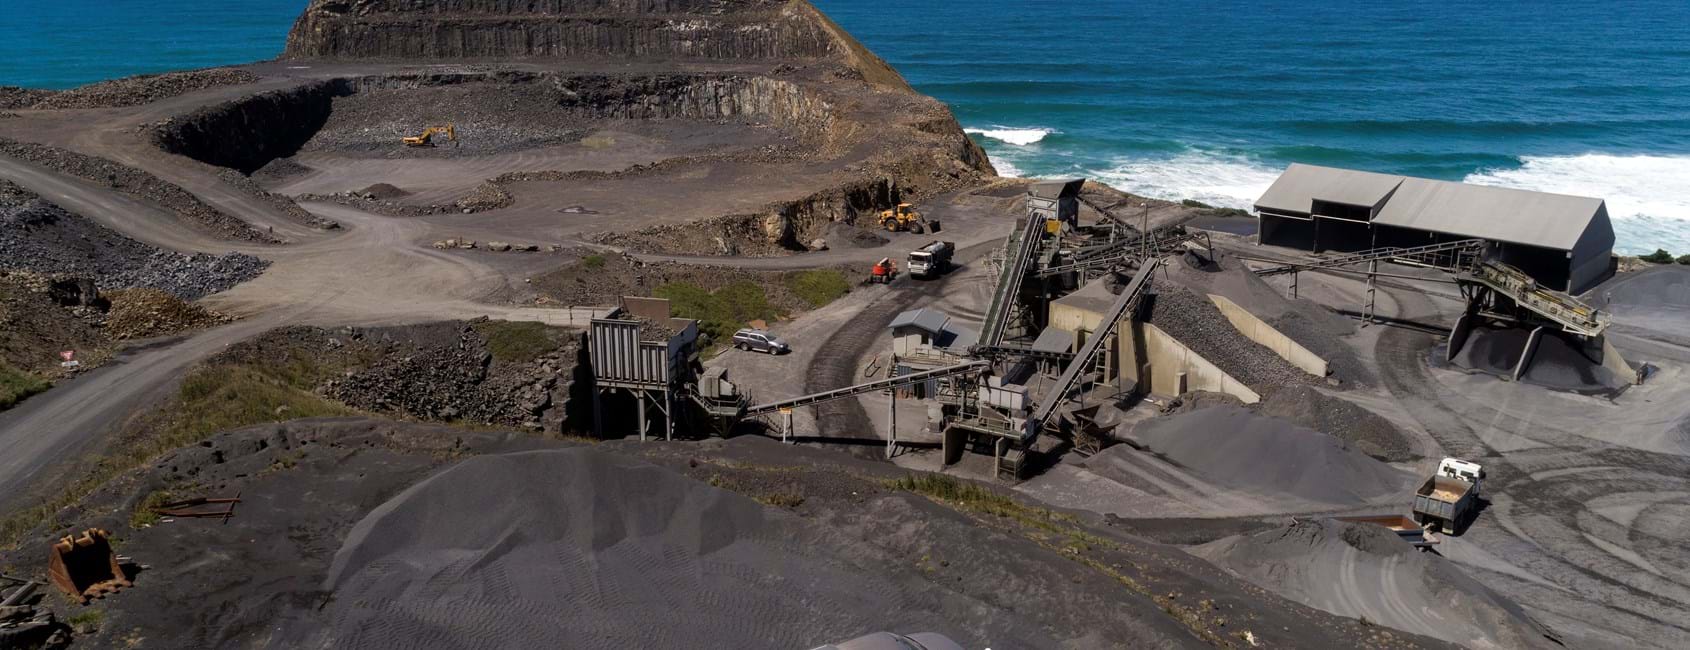 A view on the Blackhead Quarries' site in the region surrounding Dunedin, on New Zealand’s South Island.